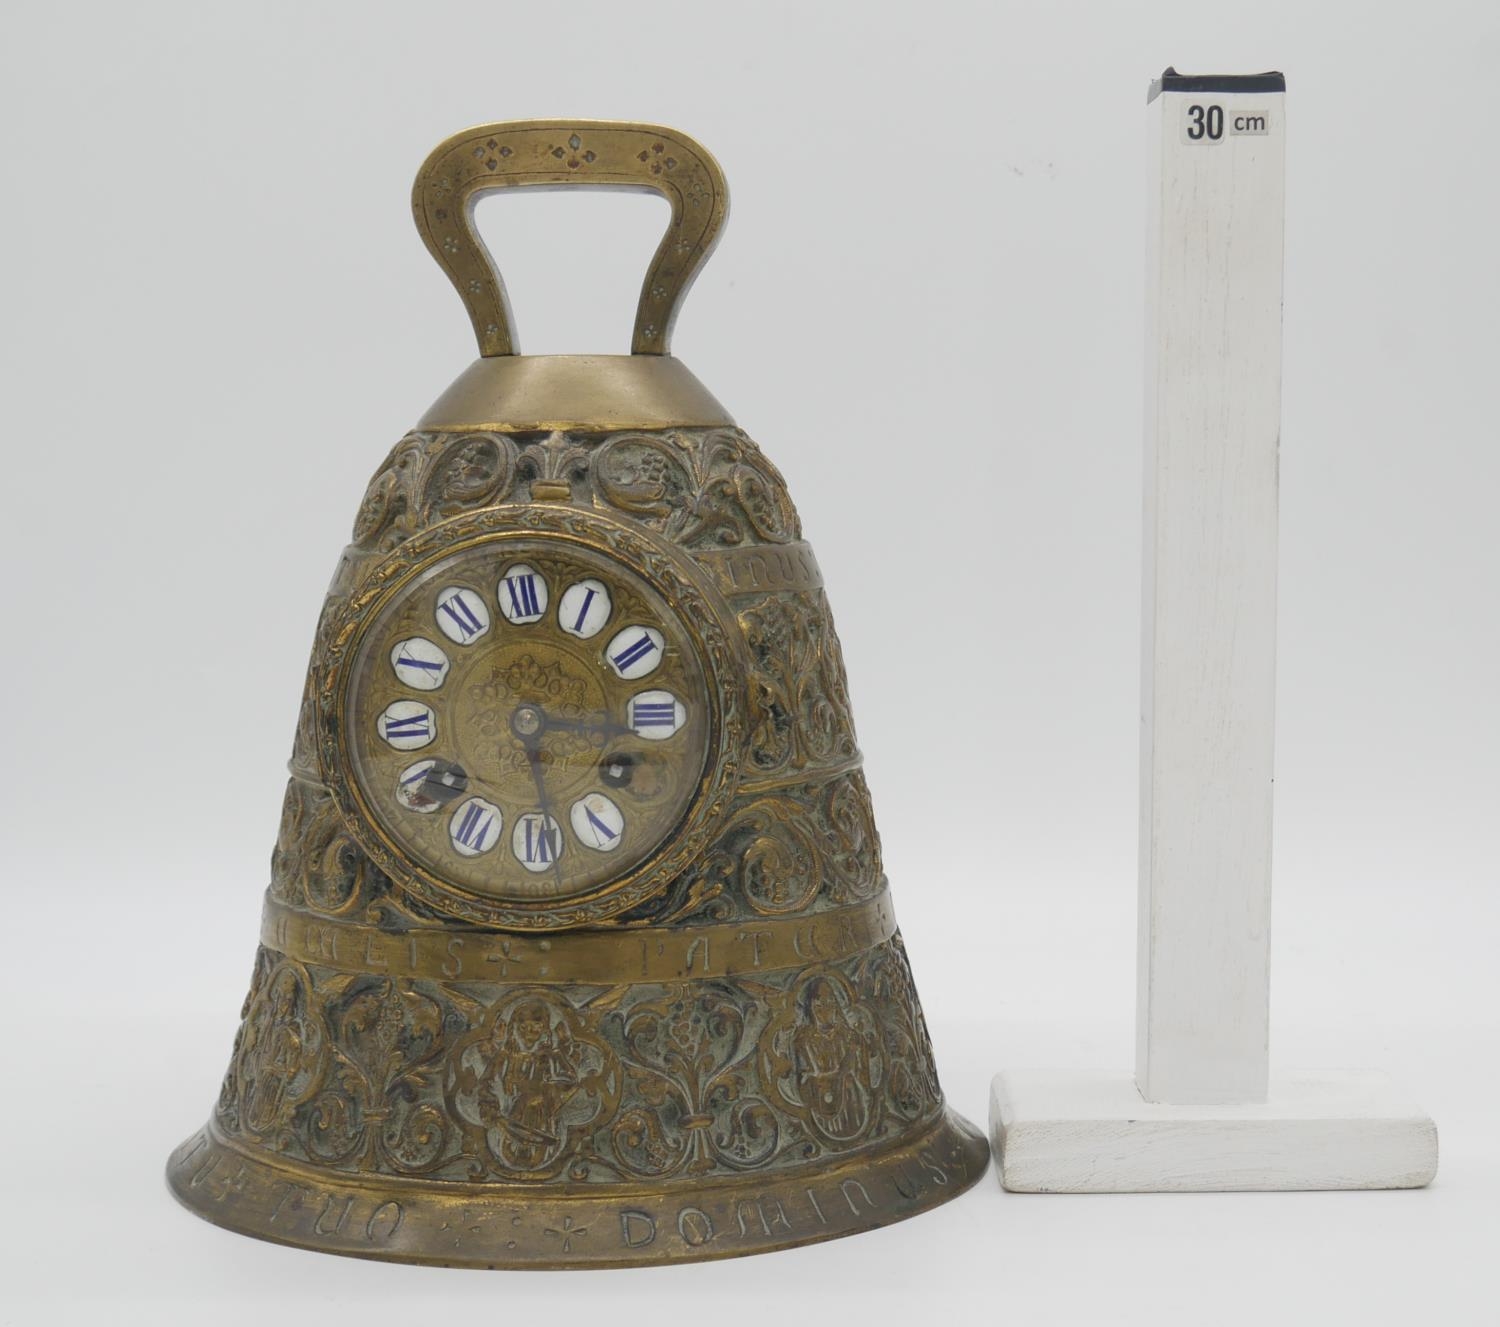 A 19th century French brass mantel clock modelled as a bell, the dial with enamel Roman numerals, - Image 6 of 6